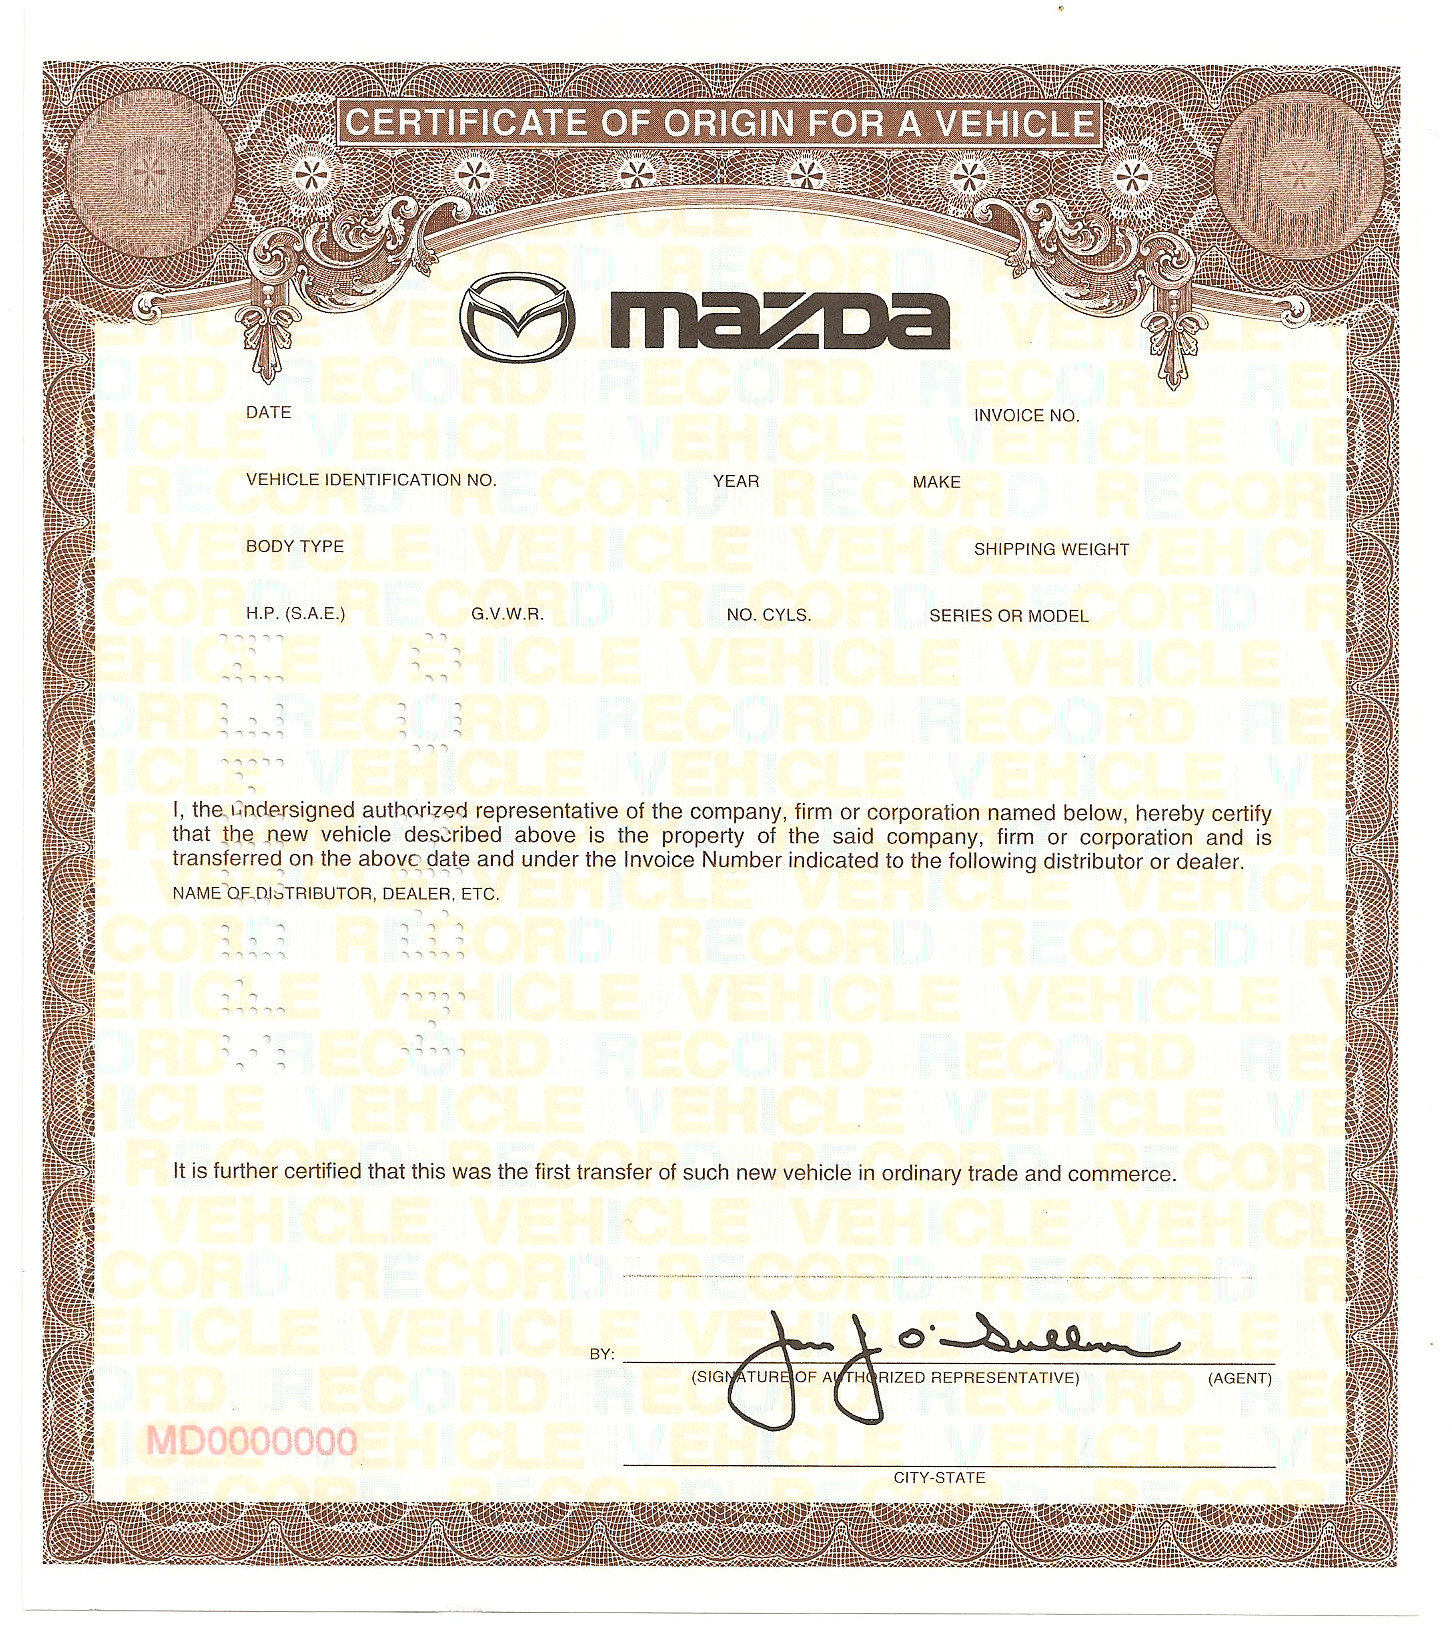 Certificate Of Origin For A Vehicle Template Intended For Certificate Of Origin For A Vehicle Template